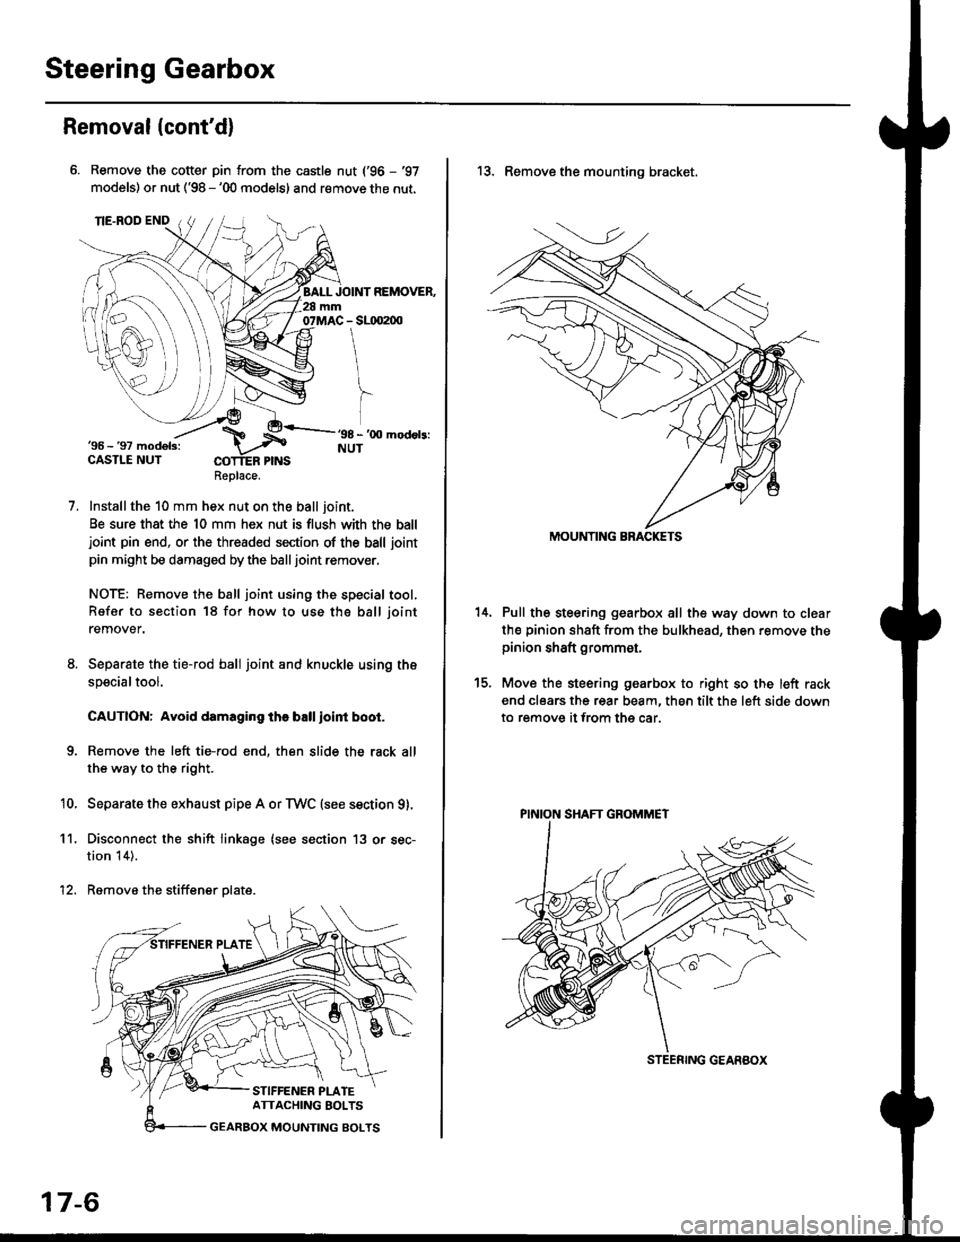 HONDA CIVIC 1999 6.G Workshop Manual Steering Gearbox
Removal(contd)
Remove the cotter pin from the castle nut (96 - 97
models) or nut (98 - 00 models) and remove the nut.
Installthe 10 mm hex nut on the ball joint.
Be sure that the